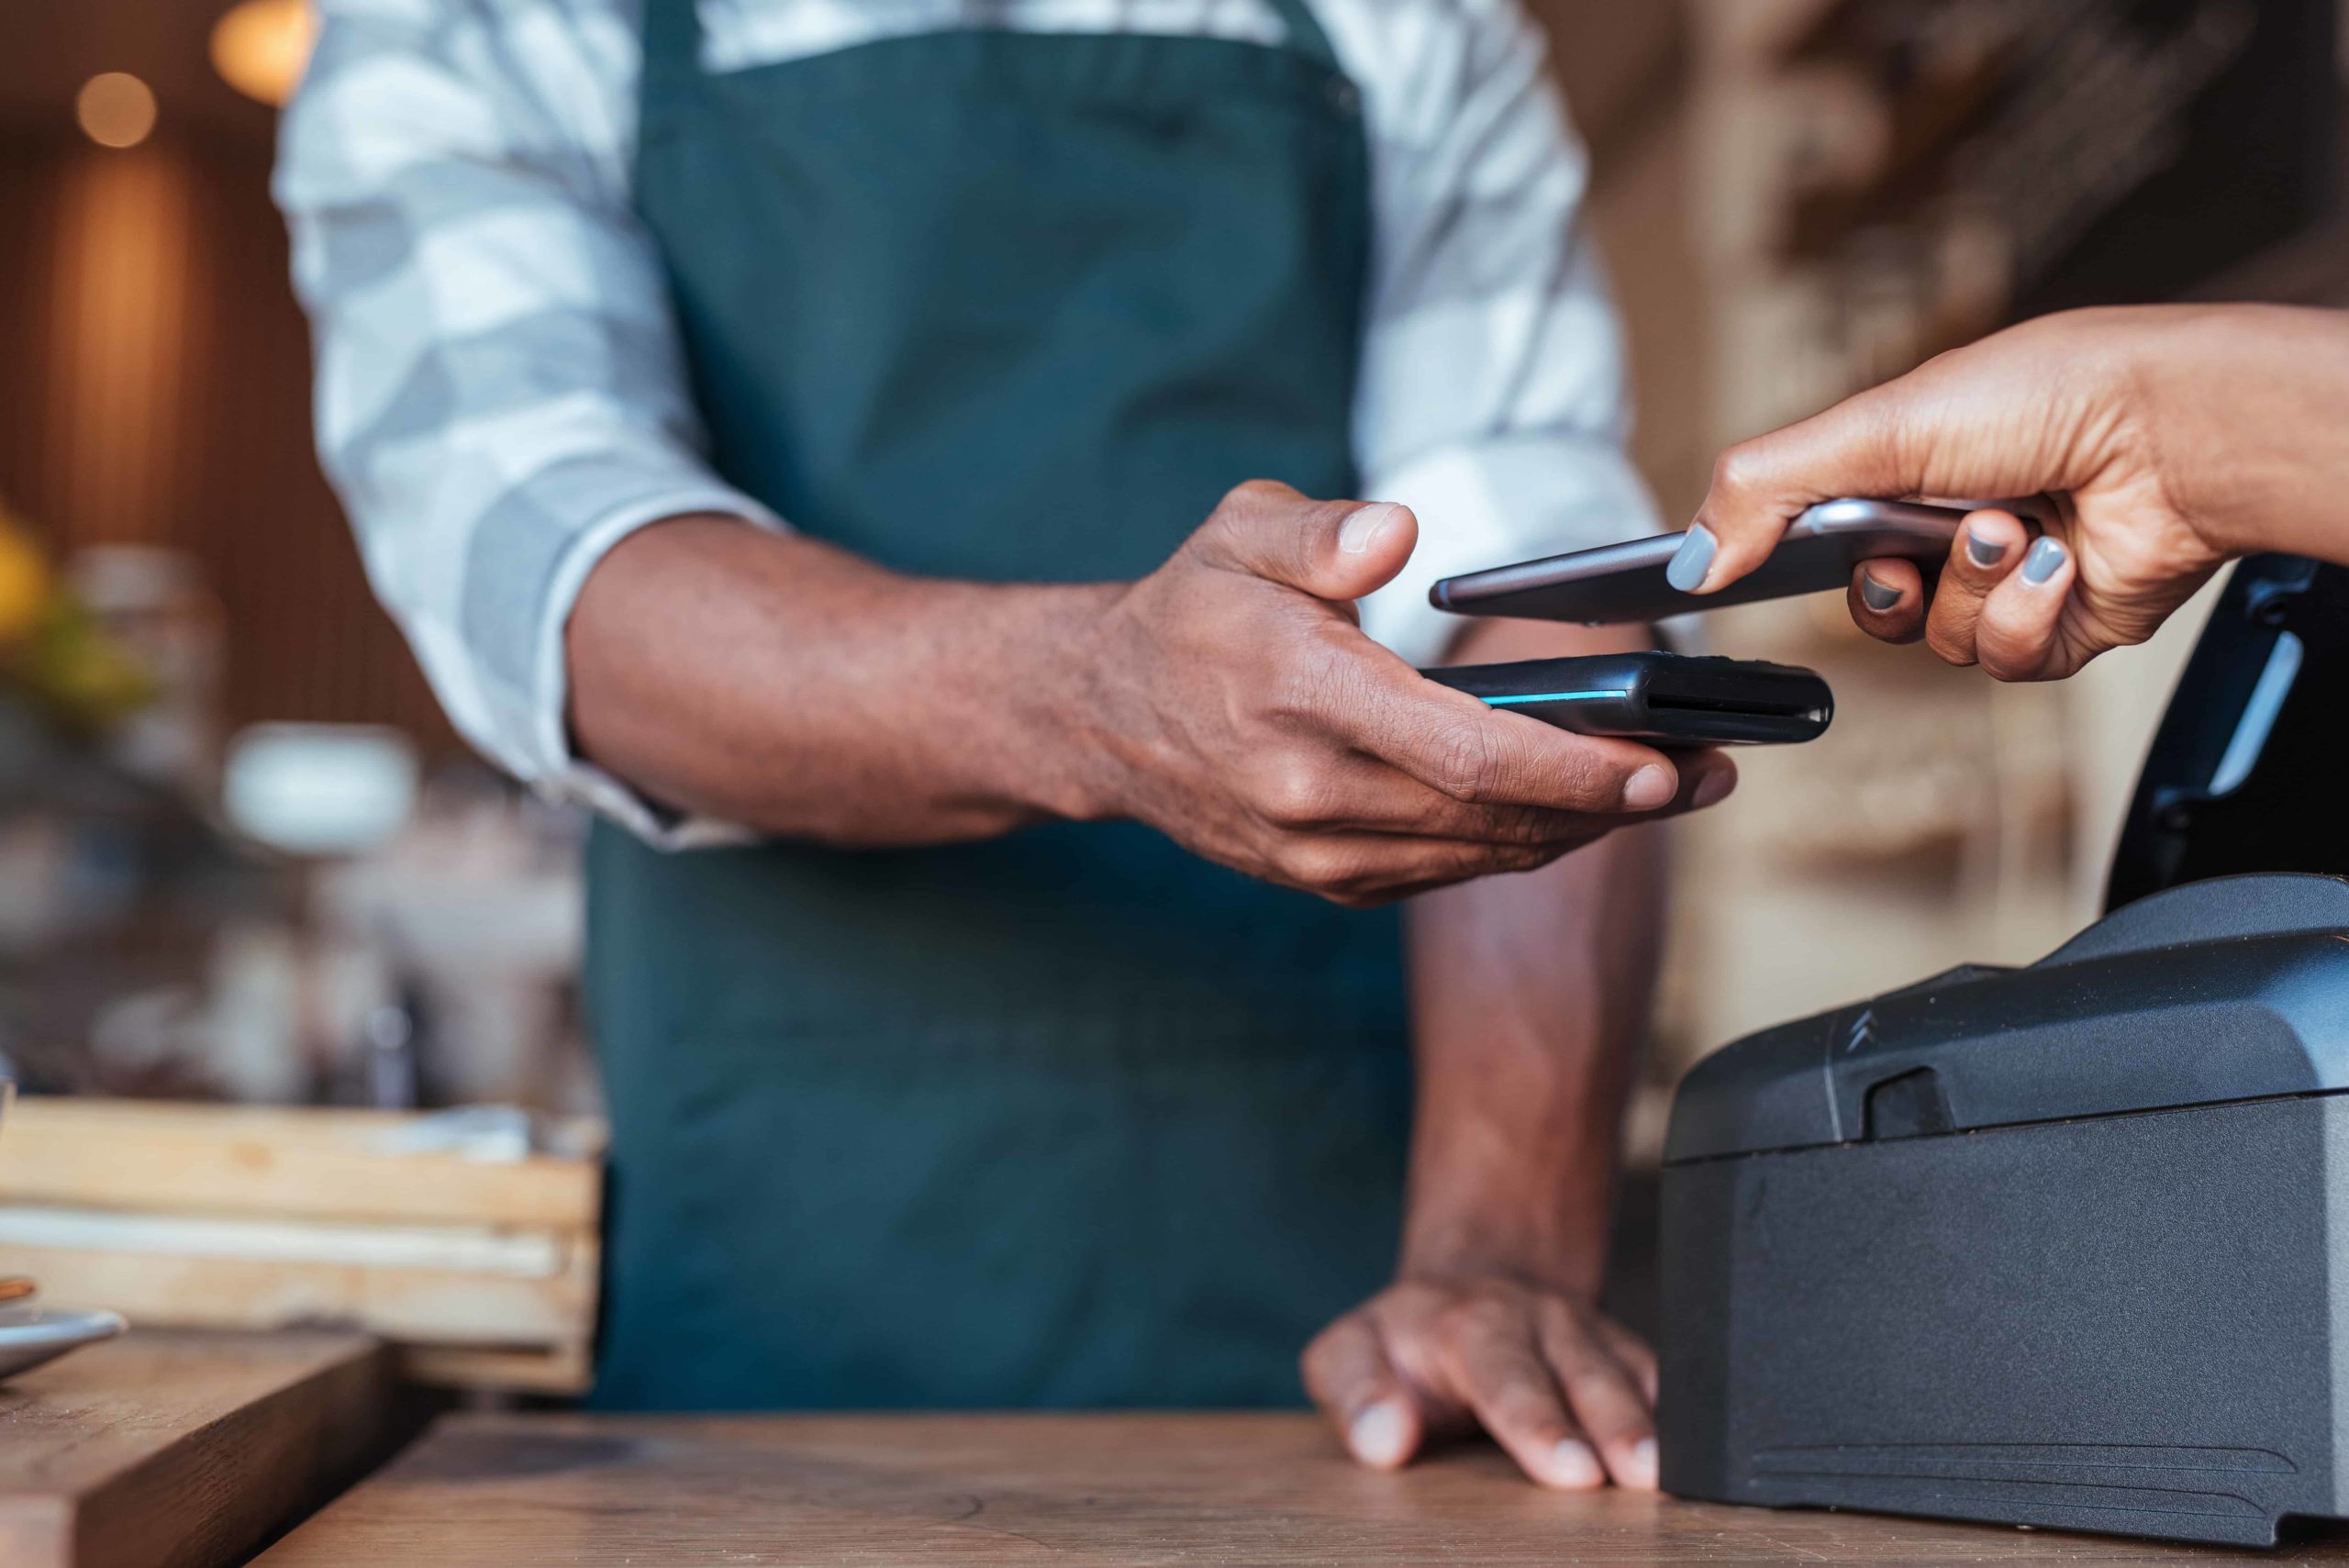 Technology in hospitality industry: Exchange between customer and cashier using smartphone